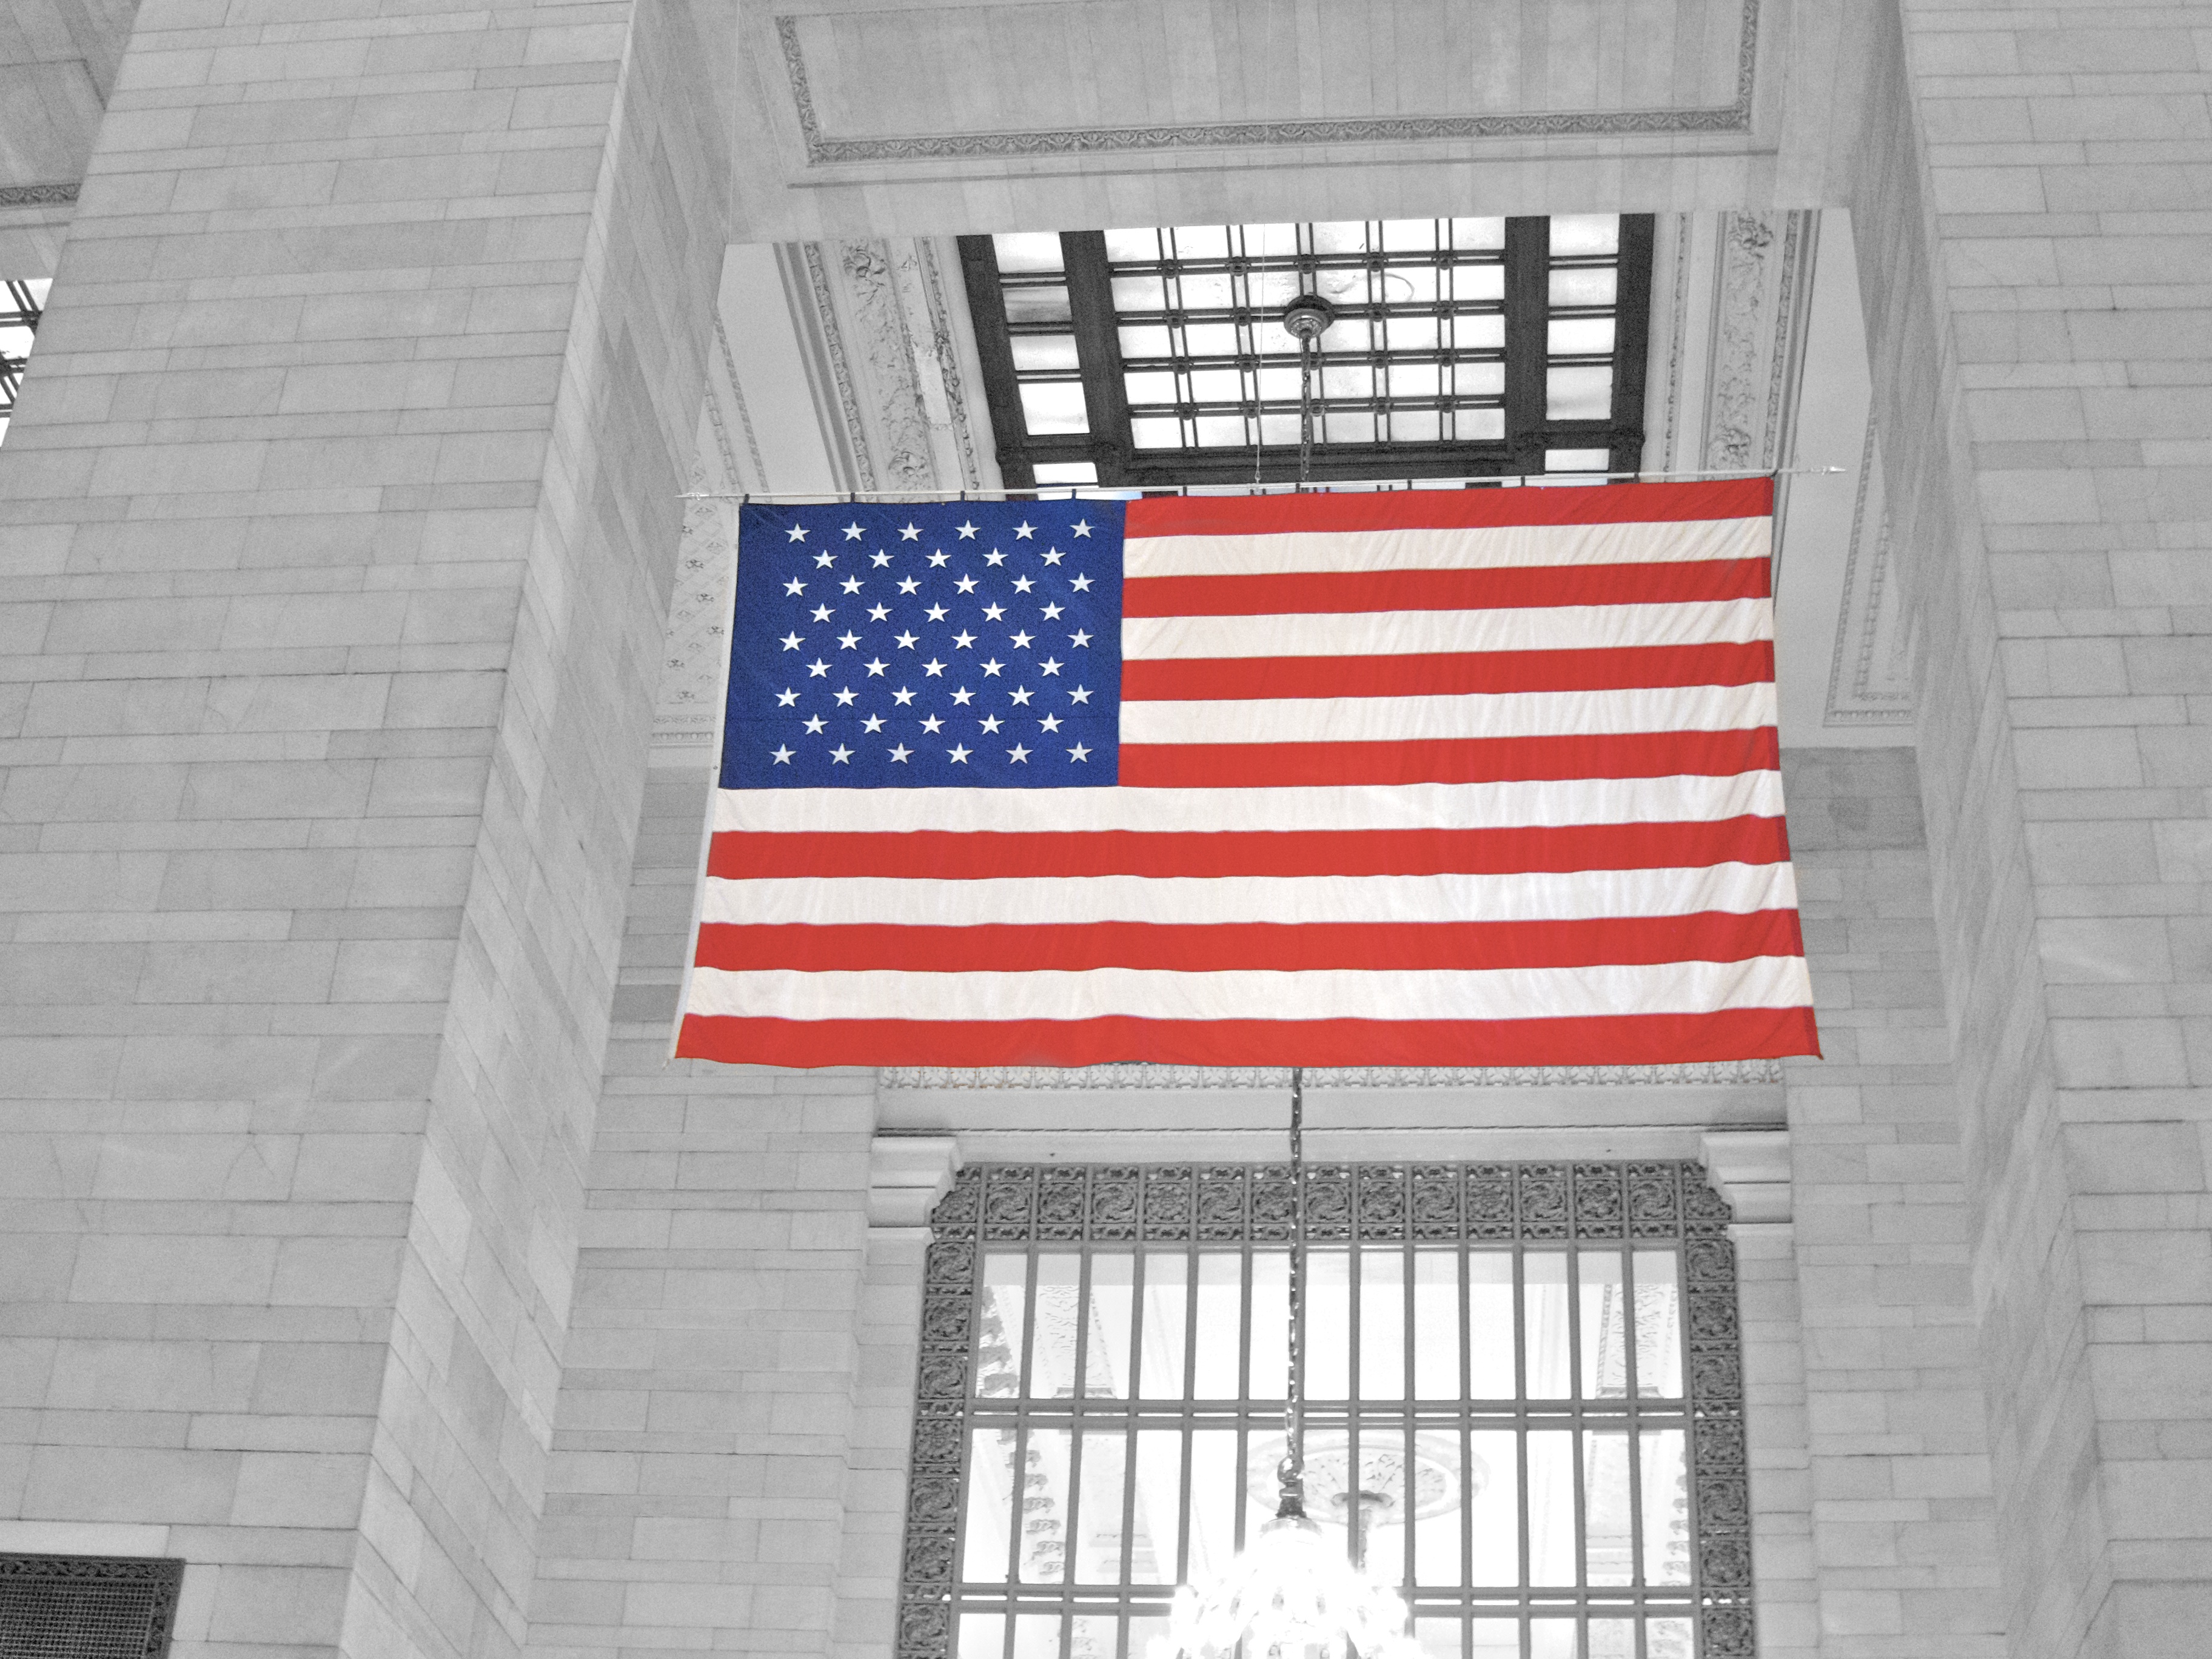 Day 121 - Grand Central Flag